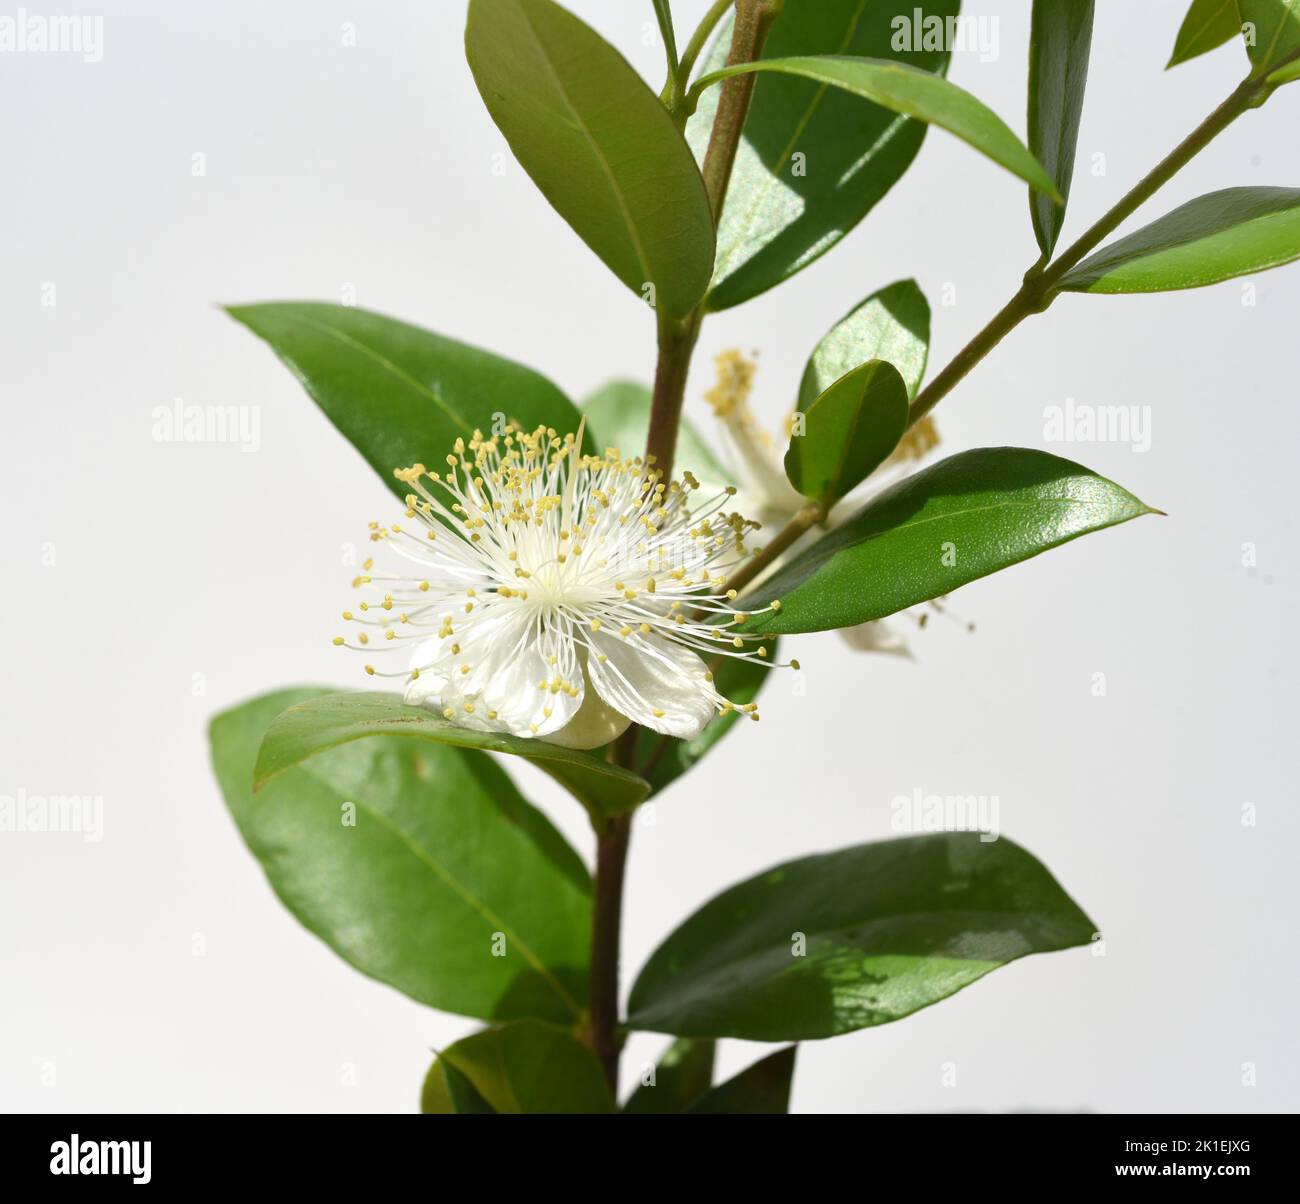 Myrtle, Myrtus communis, also called balm is a shrub with beautiful white flowers. It is an important medicinal plant and an attractive garden plant. Stock Photo